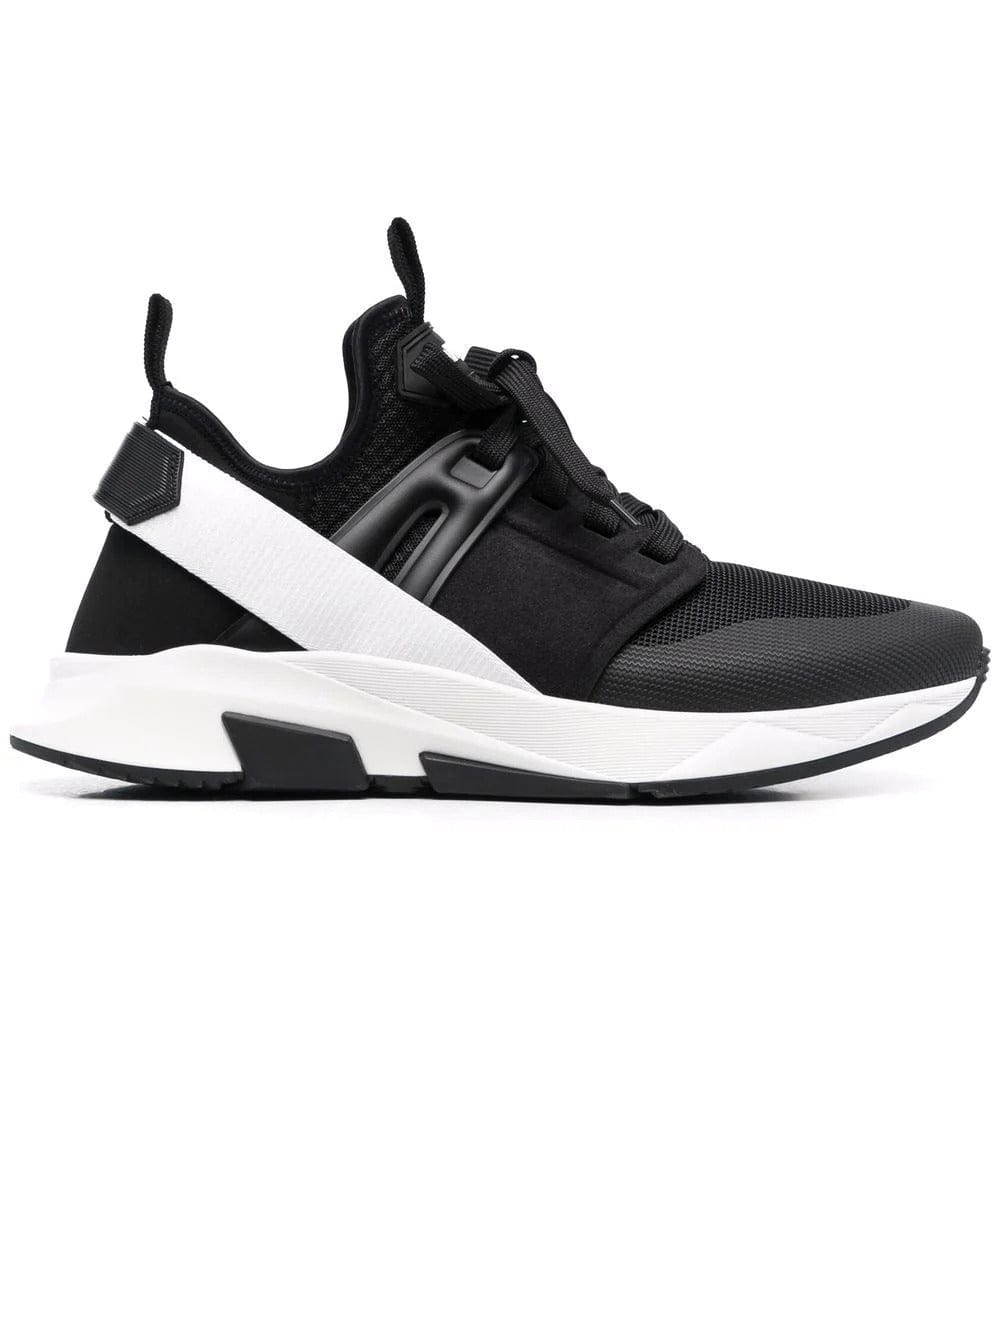 Tom Ford Jago Low-Top Black/White Sneakers – Aztec Clothing